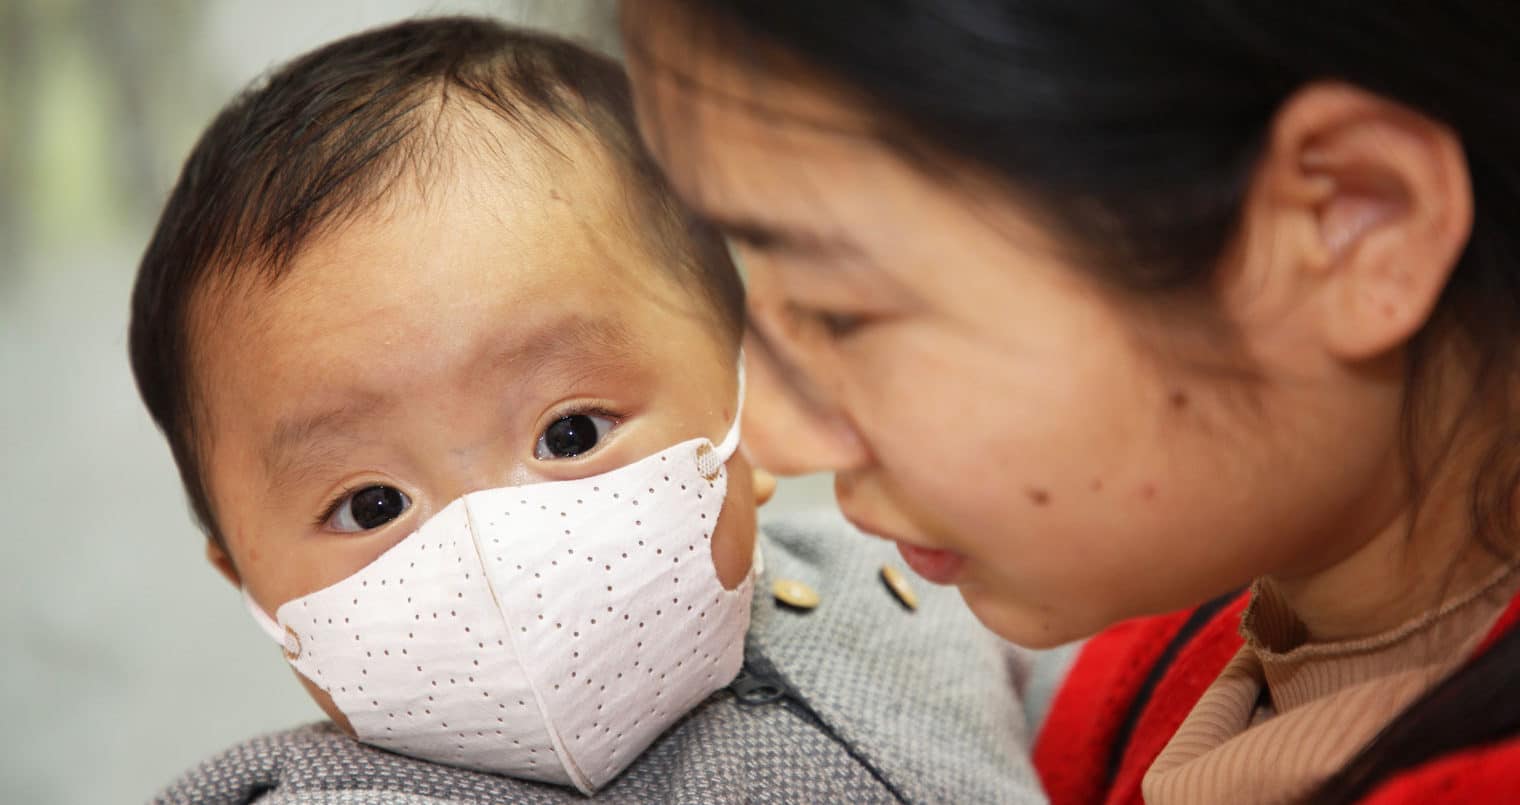 Asian woman holding her child who is wearing a face mask to help prevent catching the coronavirus.